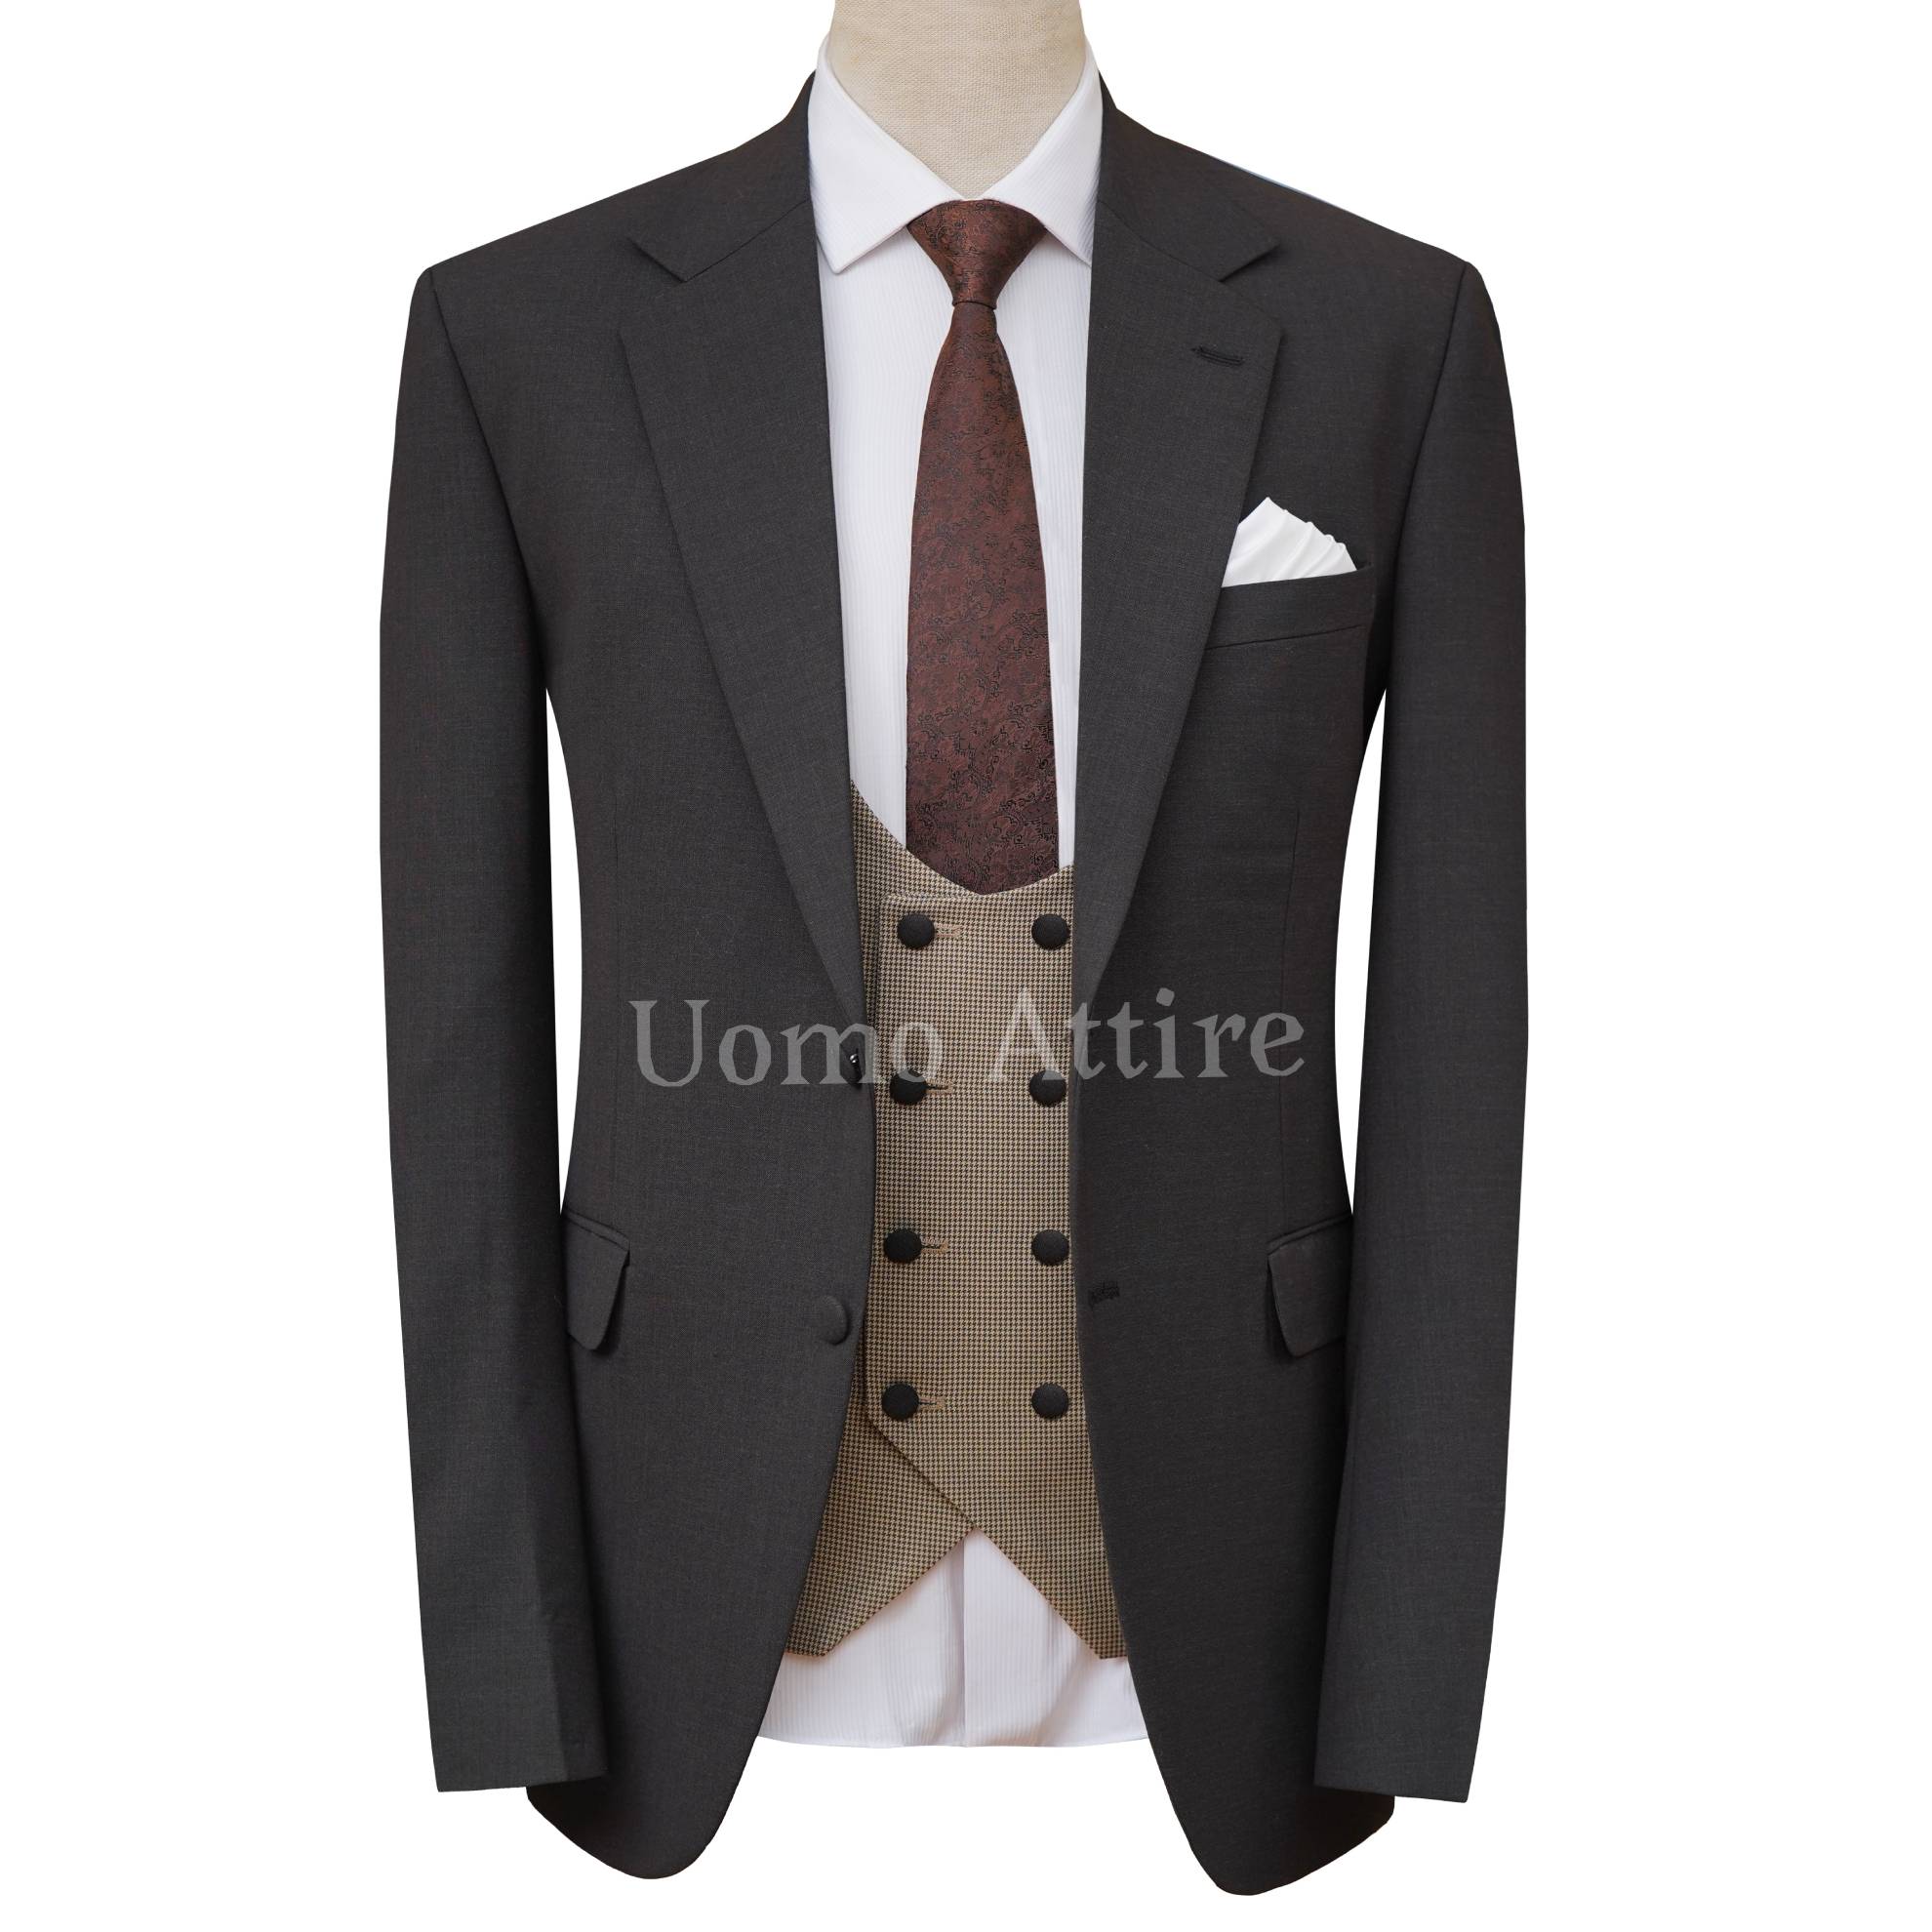 Best wedding suit for groom in United States | Light gray 3 piece suit for wedding